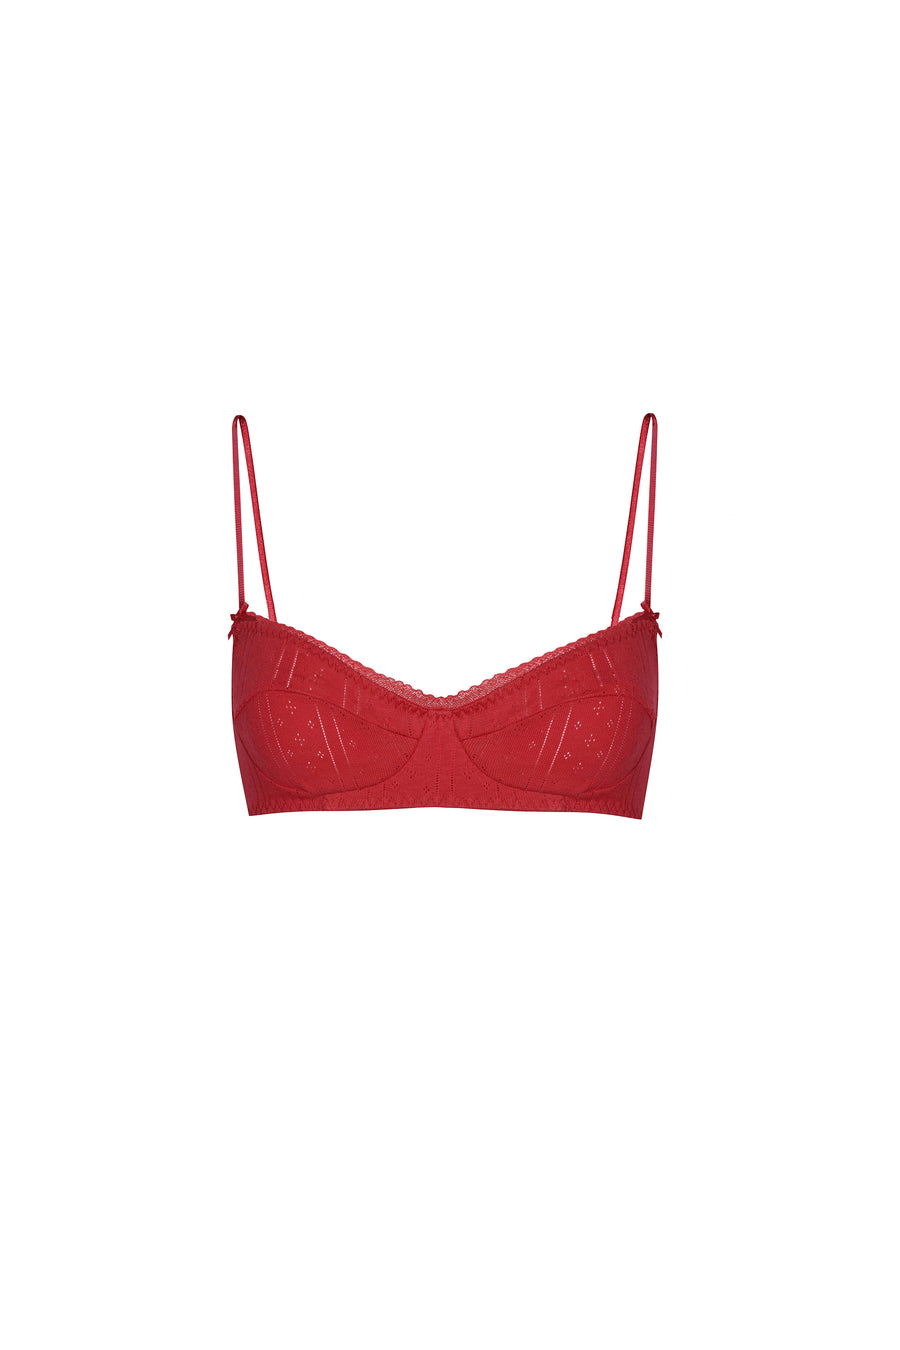 The Balconette Cherry Red – Cou Cou Intimates